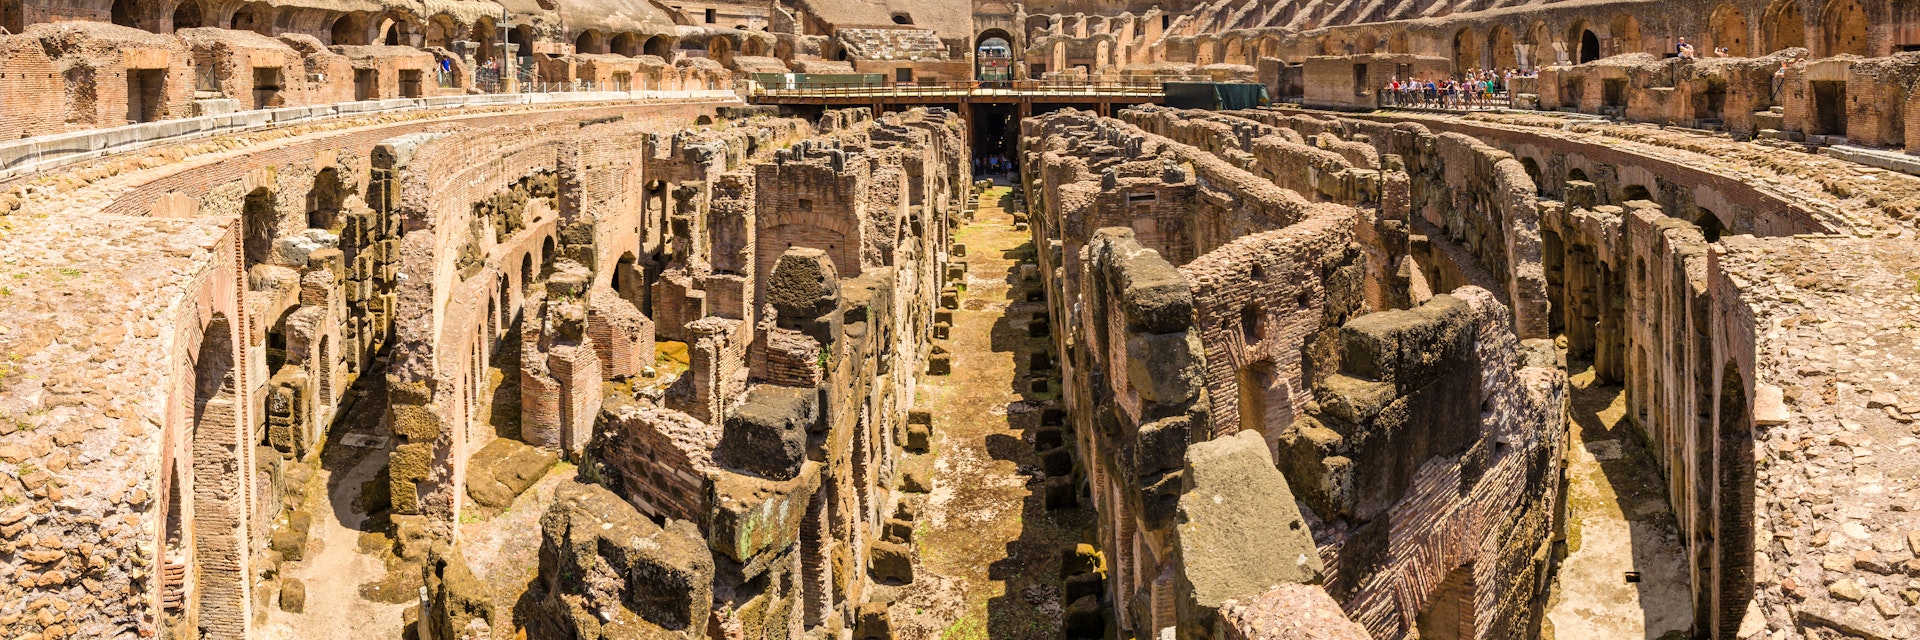 Inside the Colosseum, an amphitheater located in Ancient Rome.
614830518
Lazio, Color Image, Travel Destinations, Horizontal, Panoramic, Famous Place, Photography, Amphitheater, Rome - Italy, Italy, Capital Cities, Roman, Coliseum - Rome, Europe, Monument, Old Ruin, Built Structure, Indoors, Ruin, Innovation, Rome